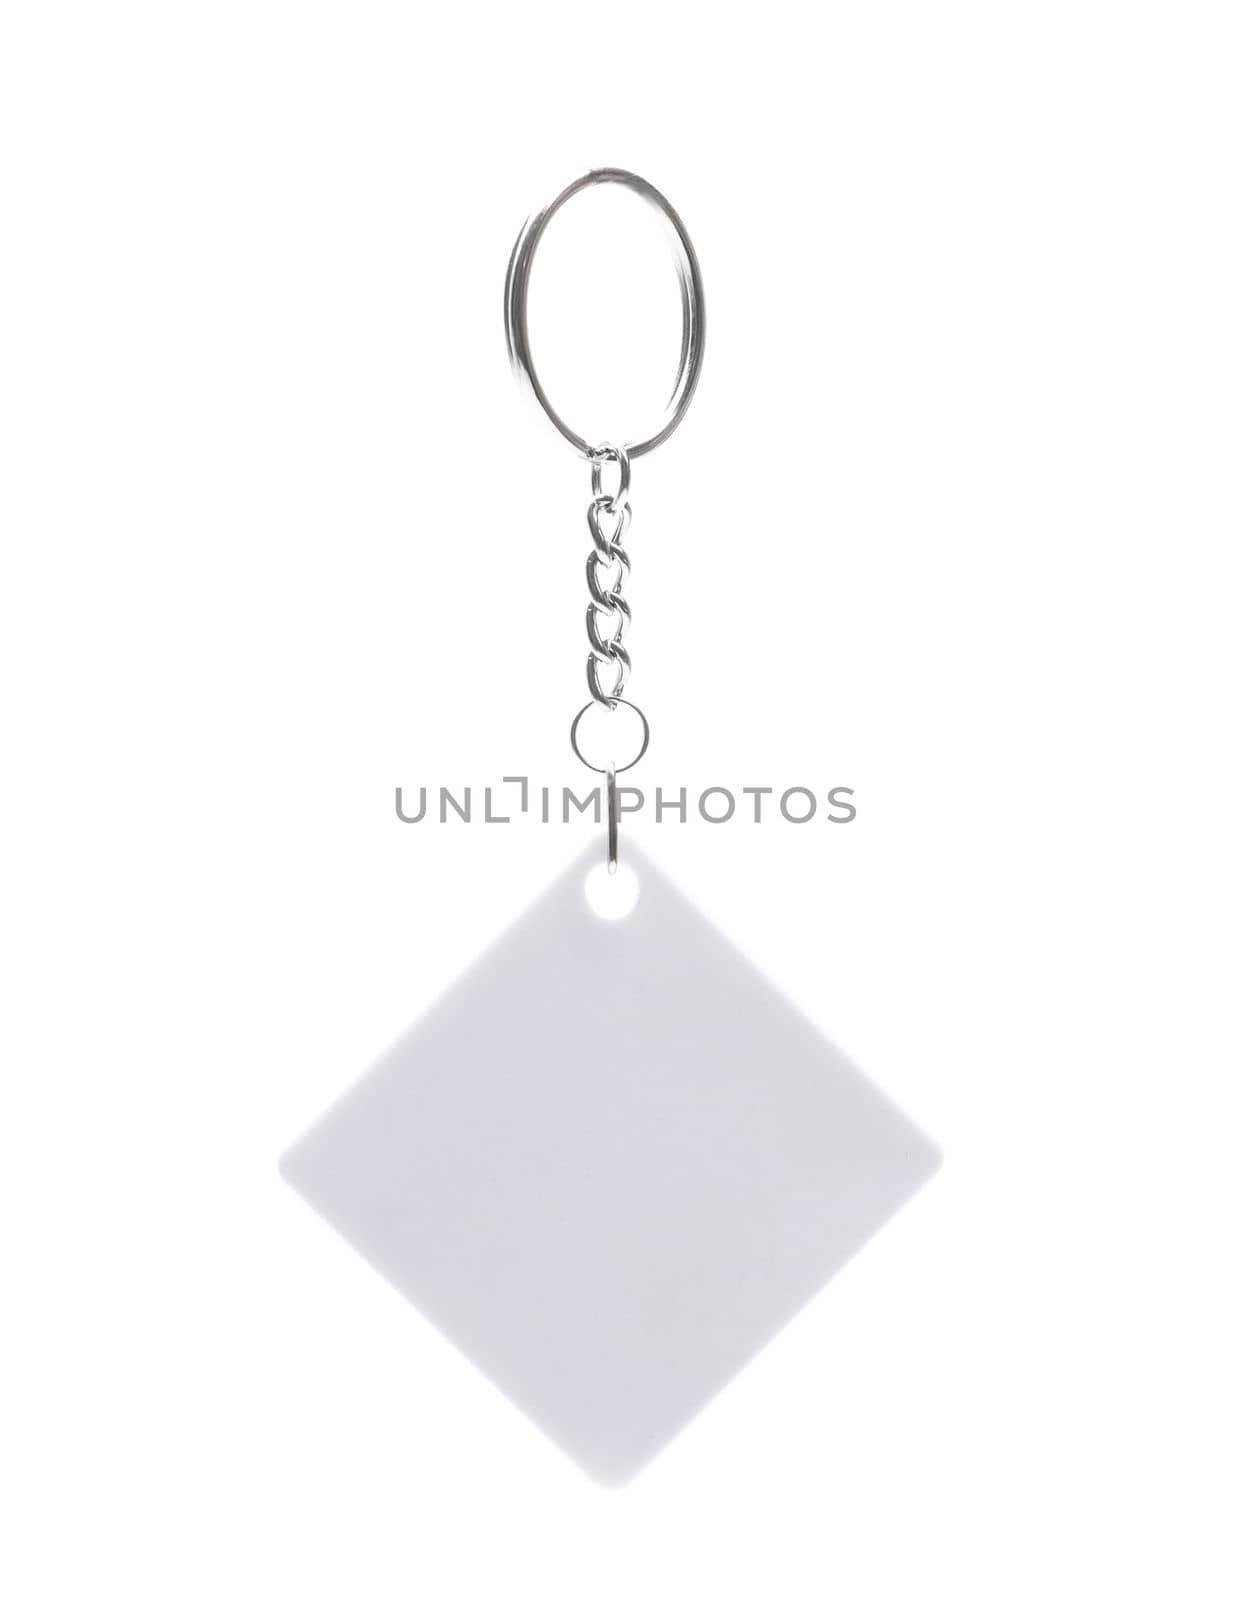 White empty square key holder with metal ring isolated on white background